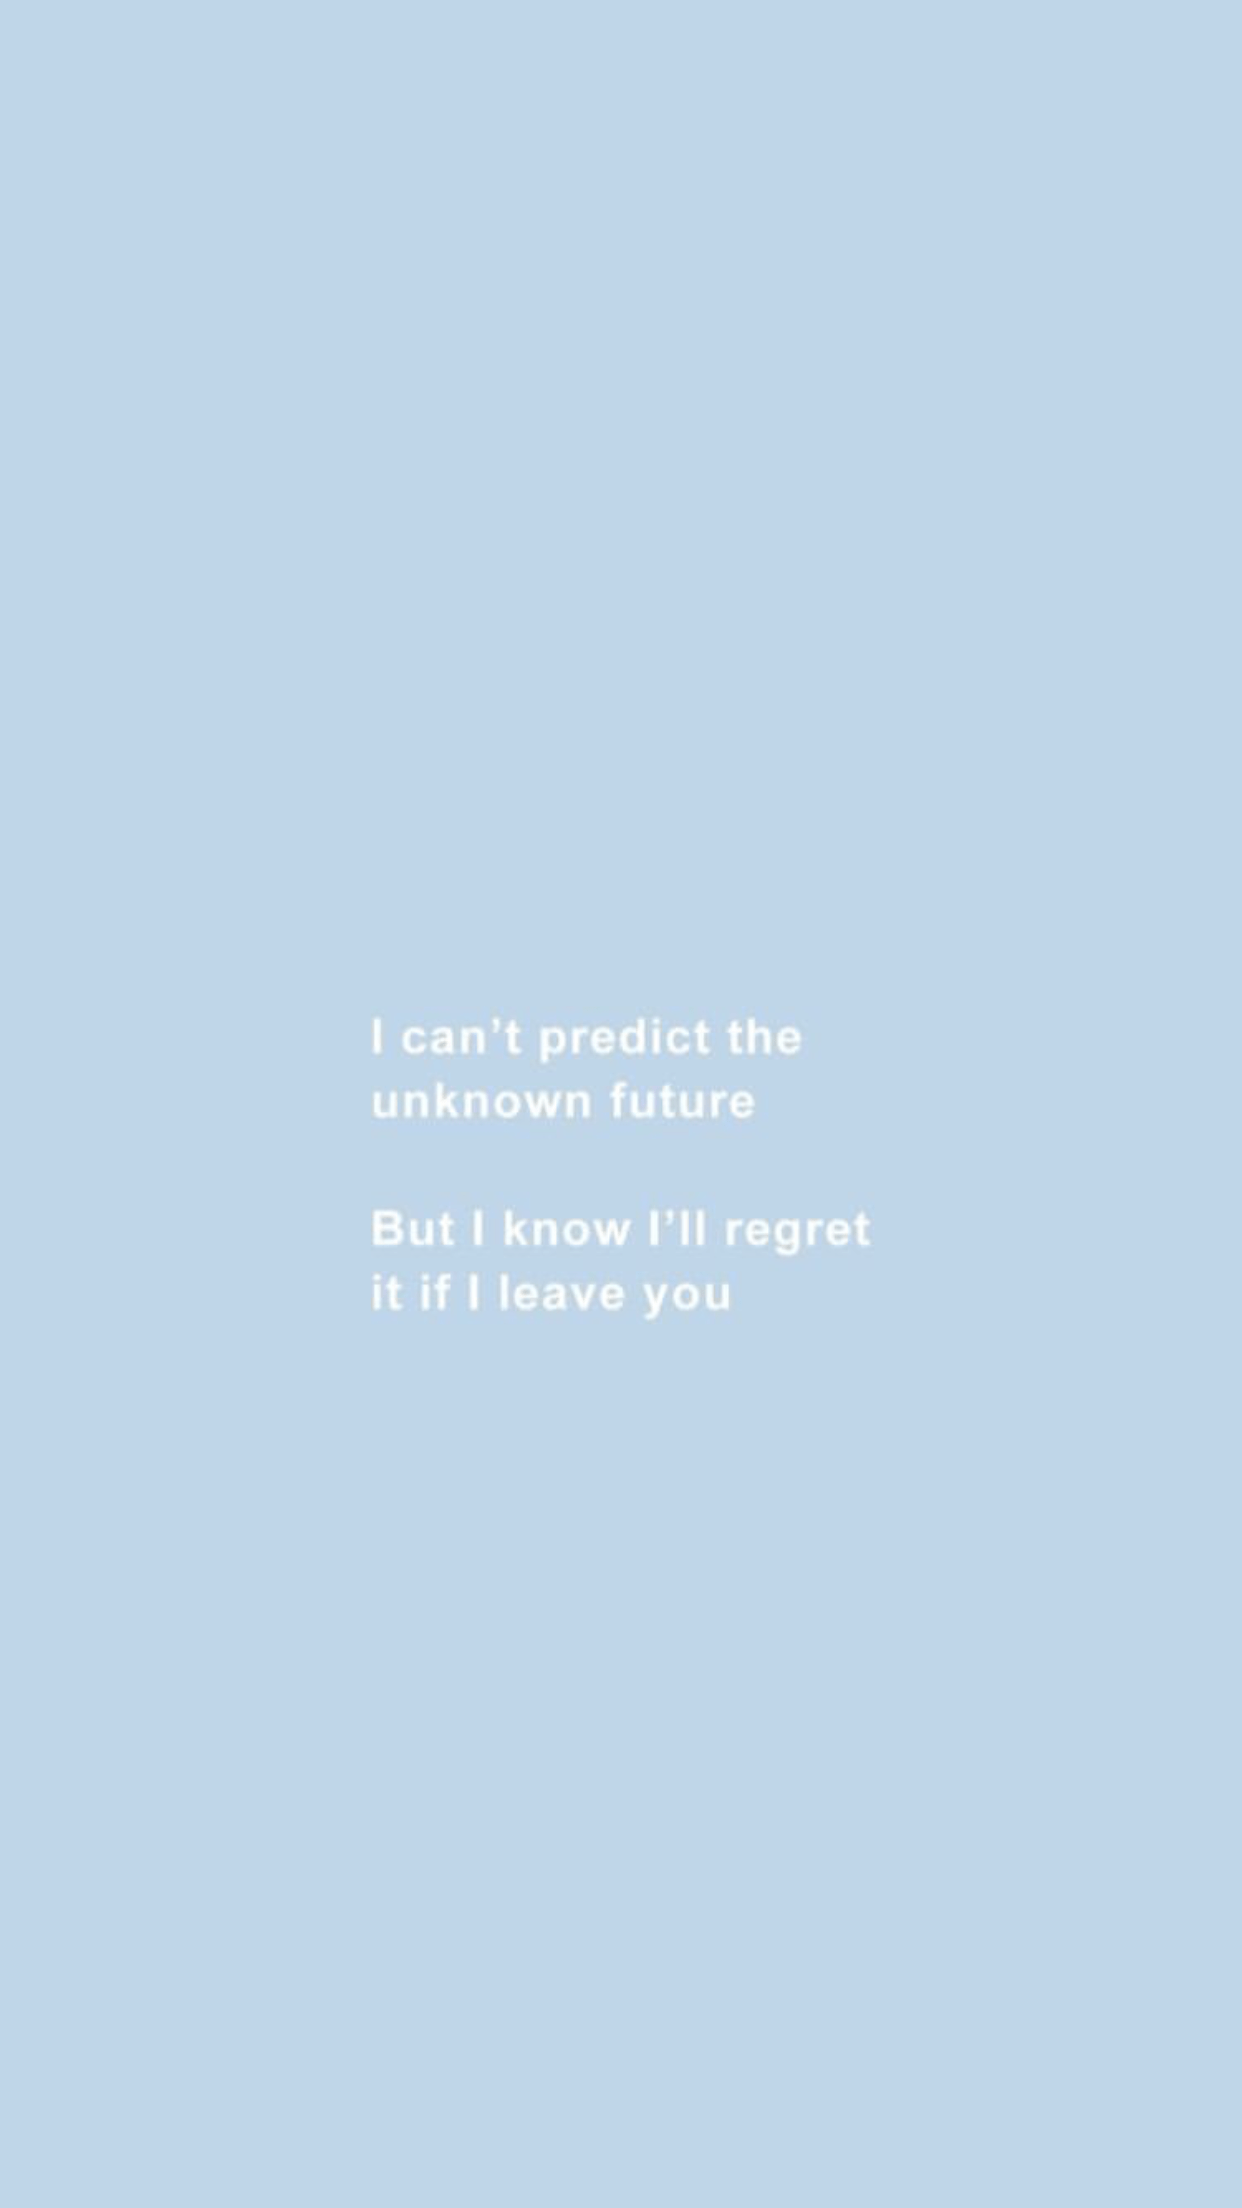 I can't predict the unknown future But I know I'll regret it if I leave you - Quotes